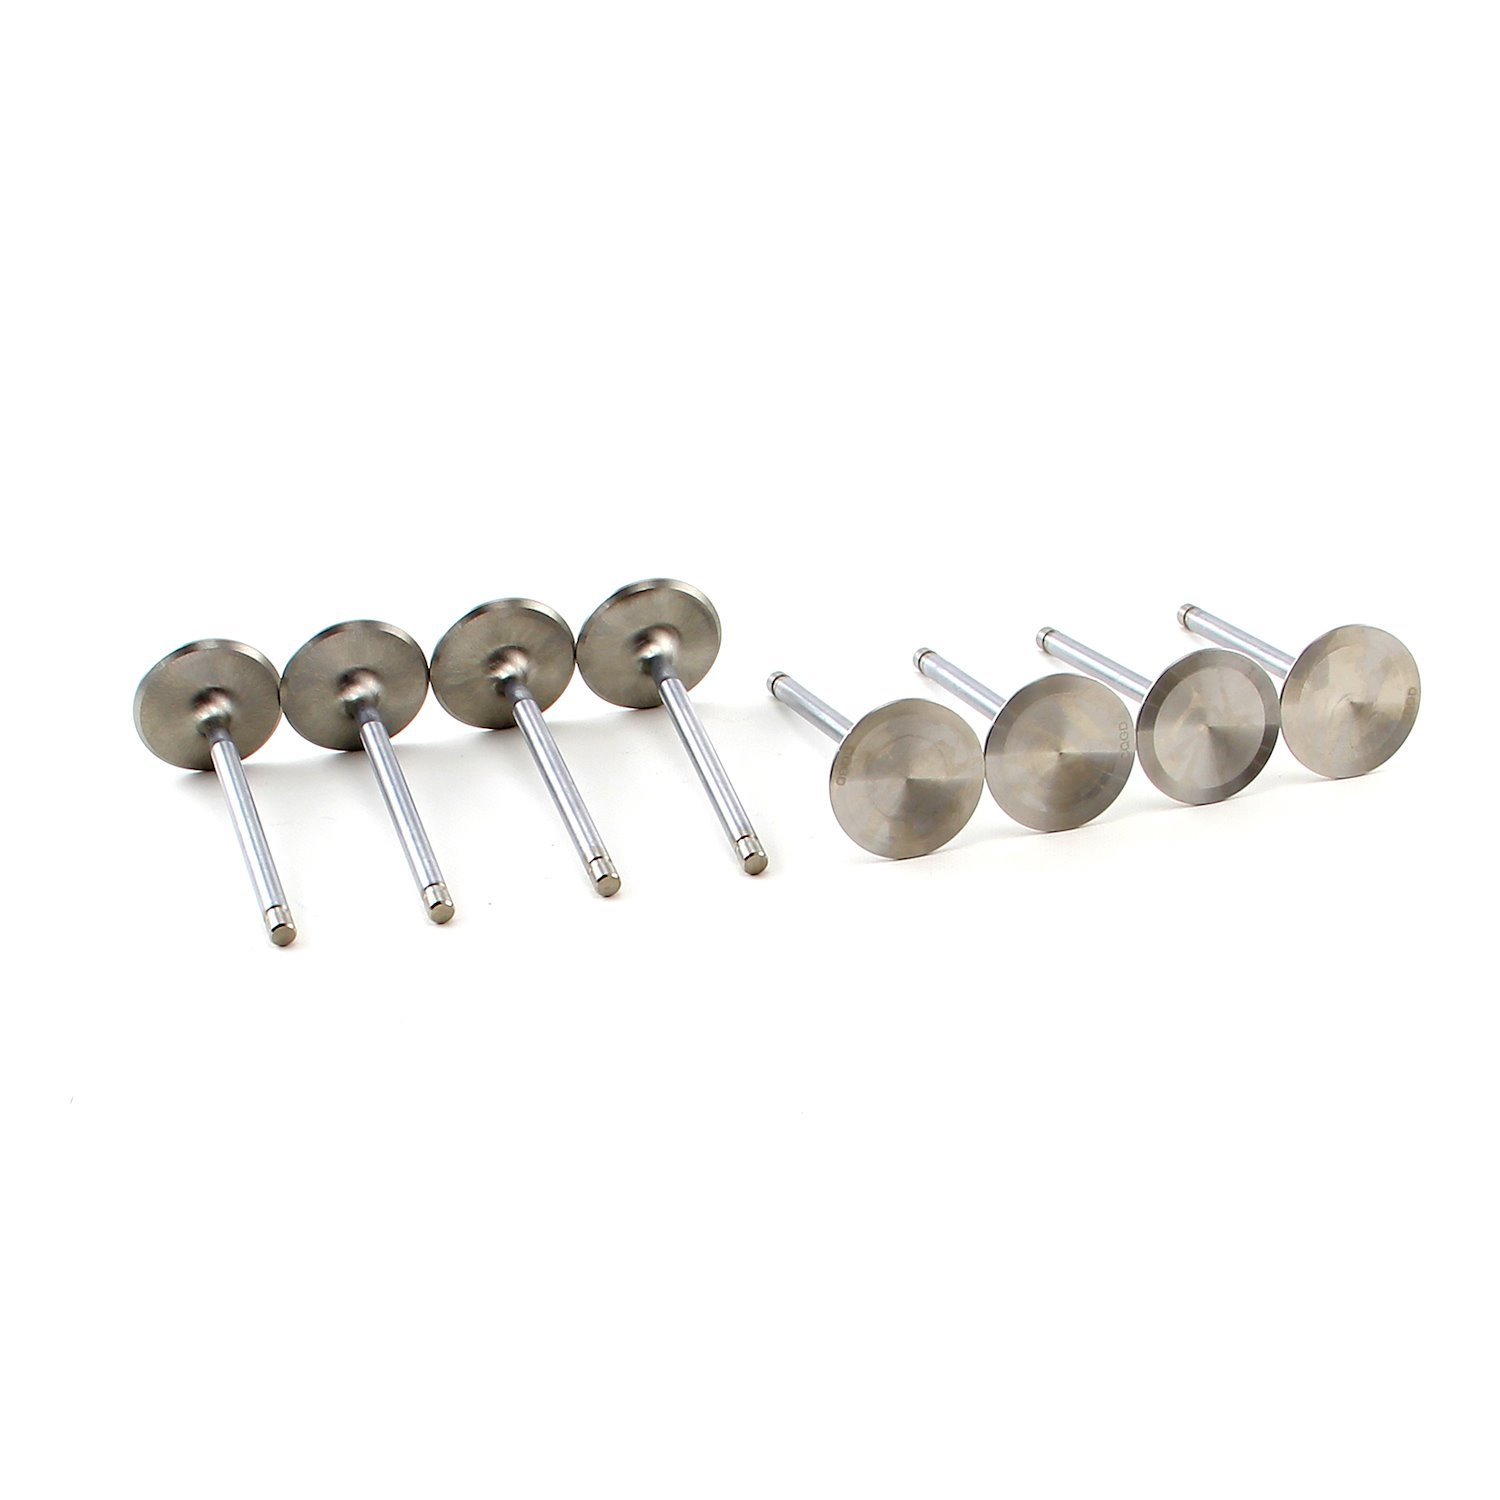 PCE273.1023 Stainless Steel Intake Valves Big Block Chevy 454, Overall Length: 5.244 in.